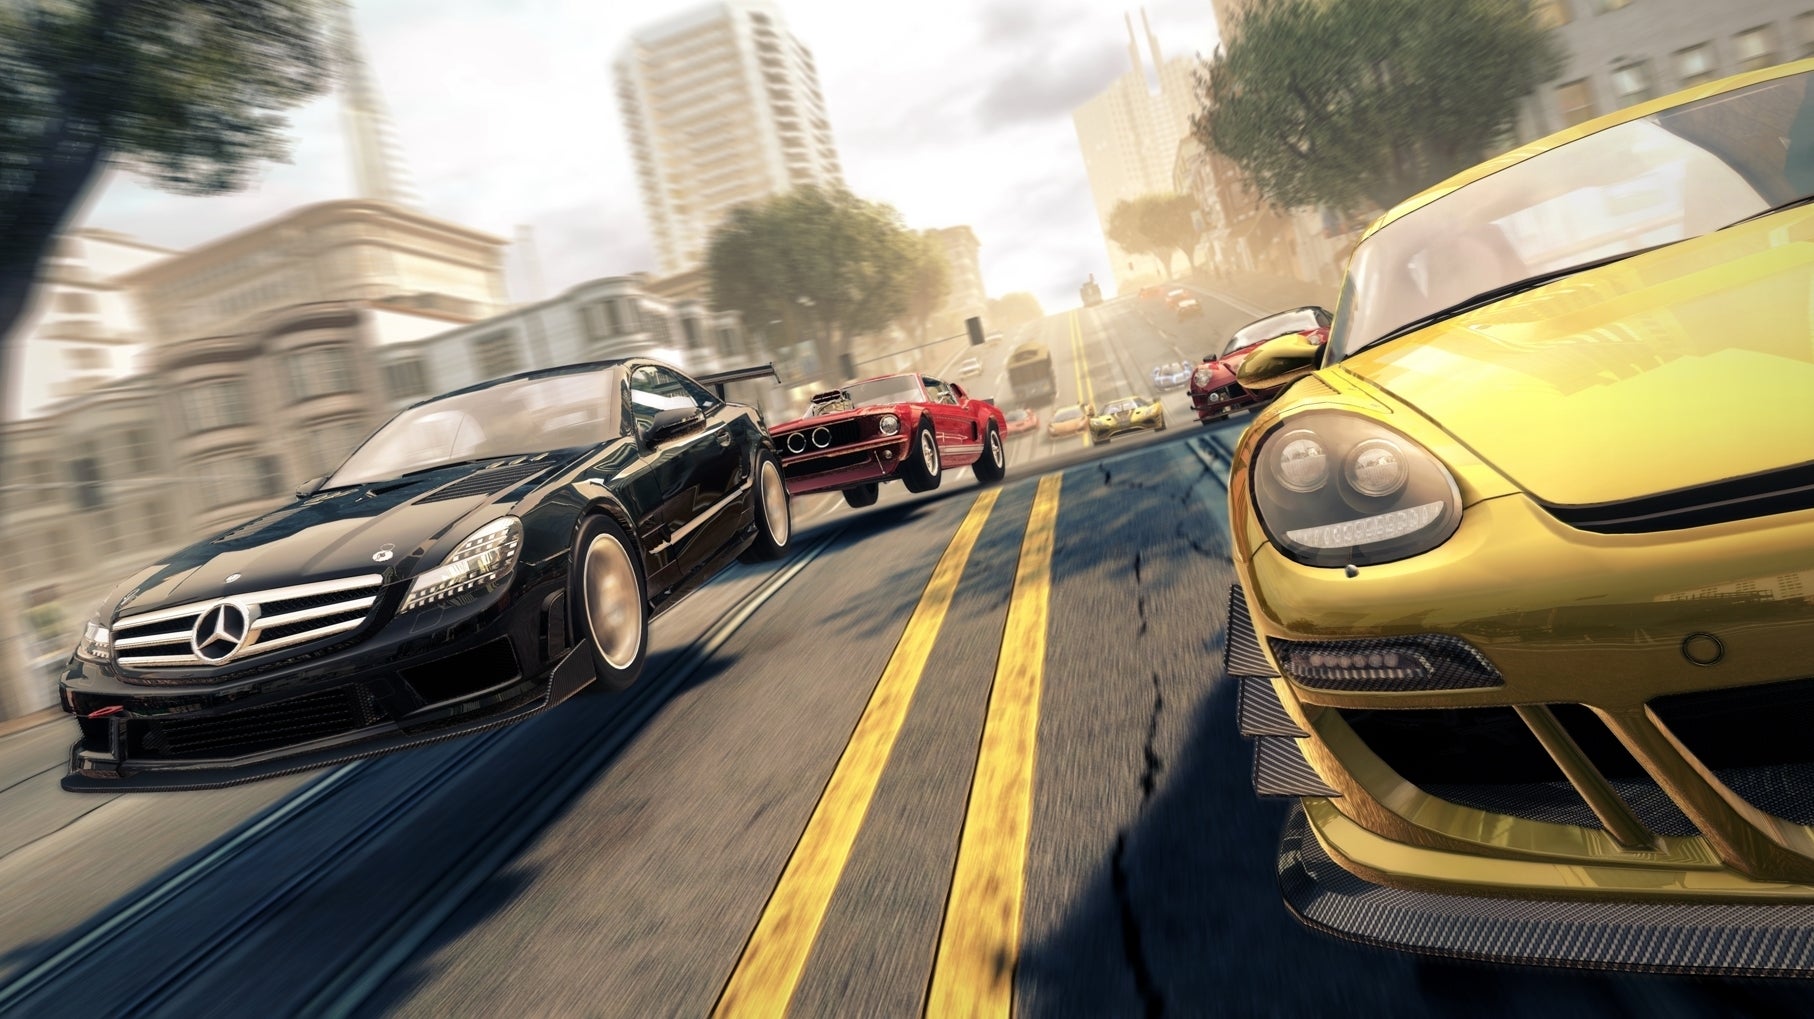 Image for The Crew franchise has clocked up over 30 million players